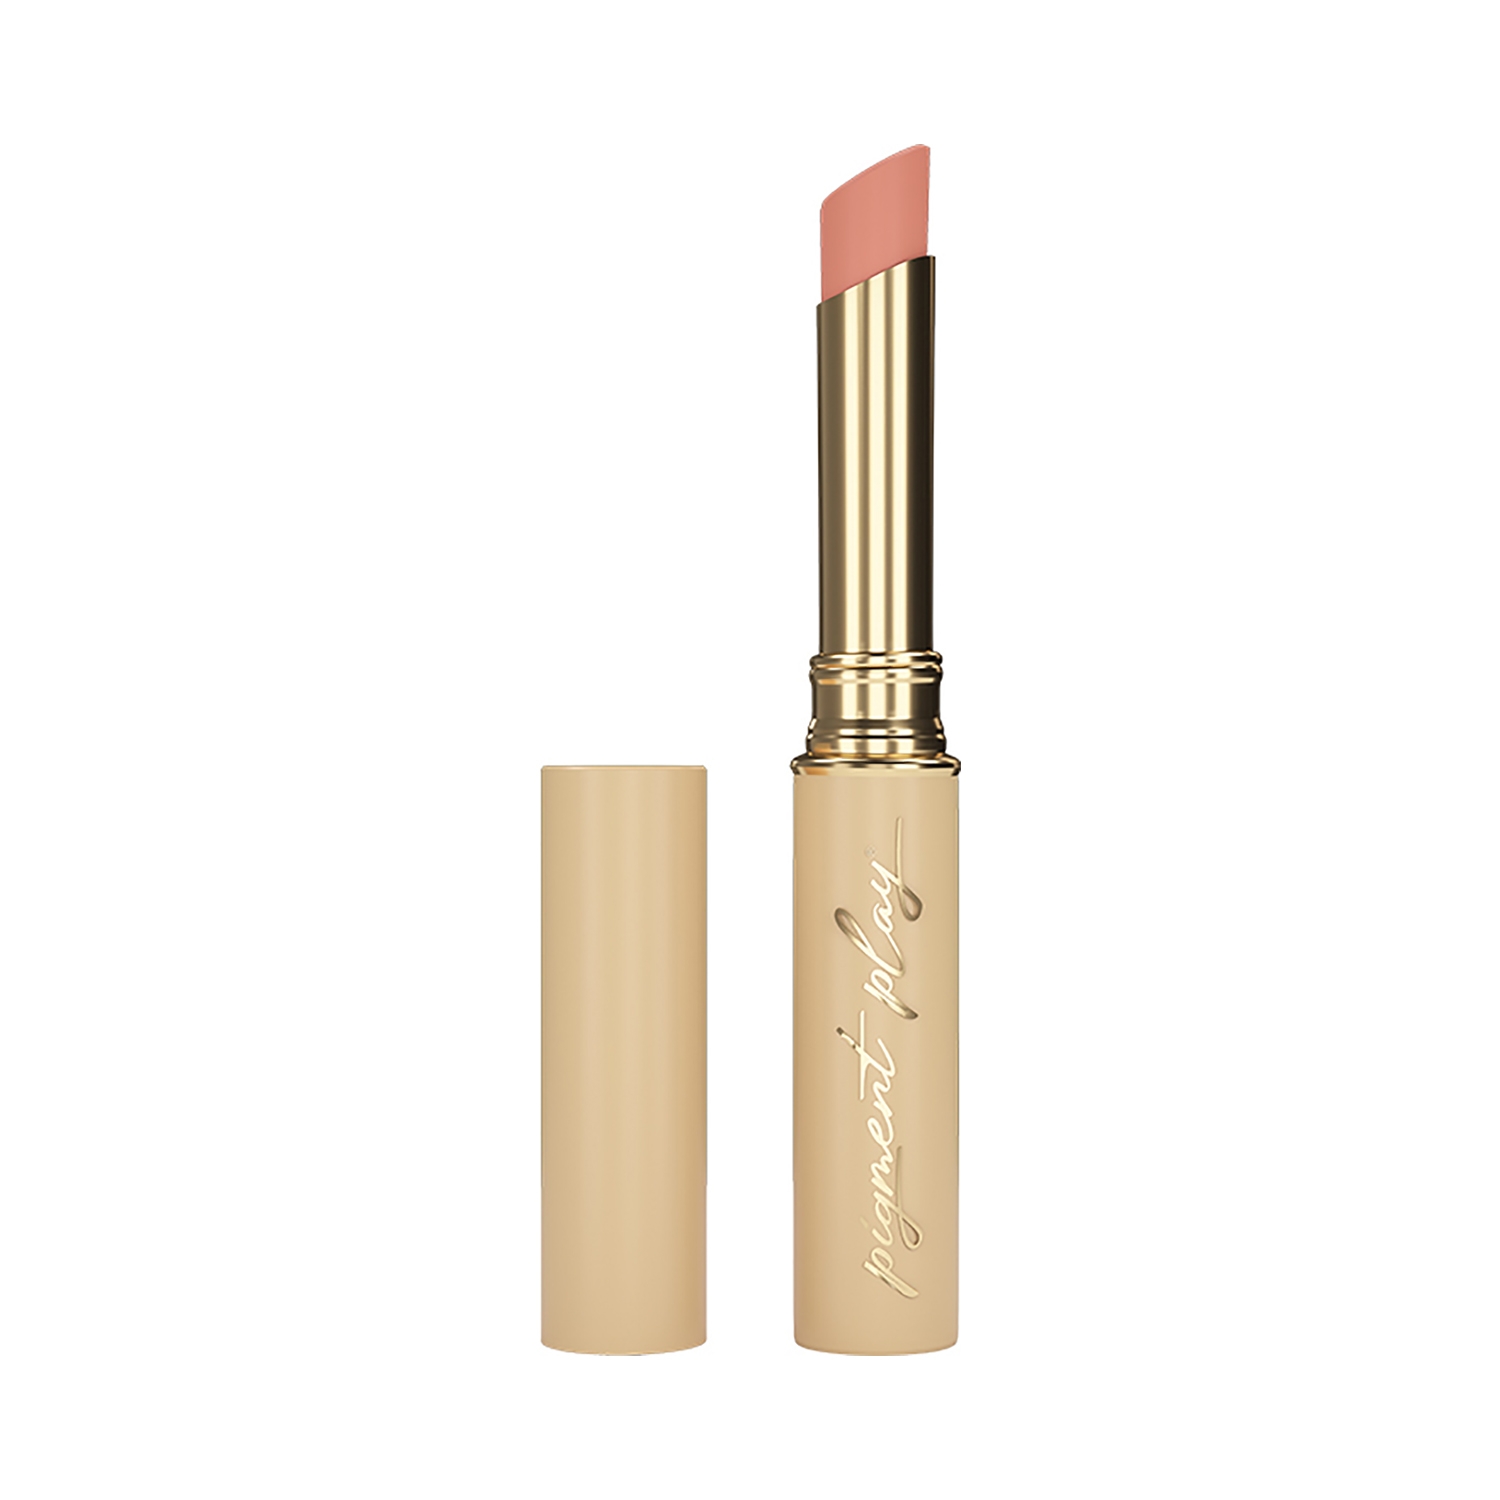 Pigment Play | Pigment Play Performer Matte Lipstick - After Glow (2.9g)